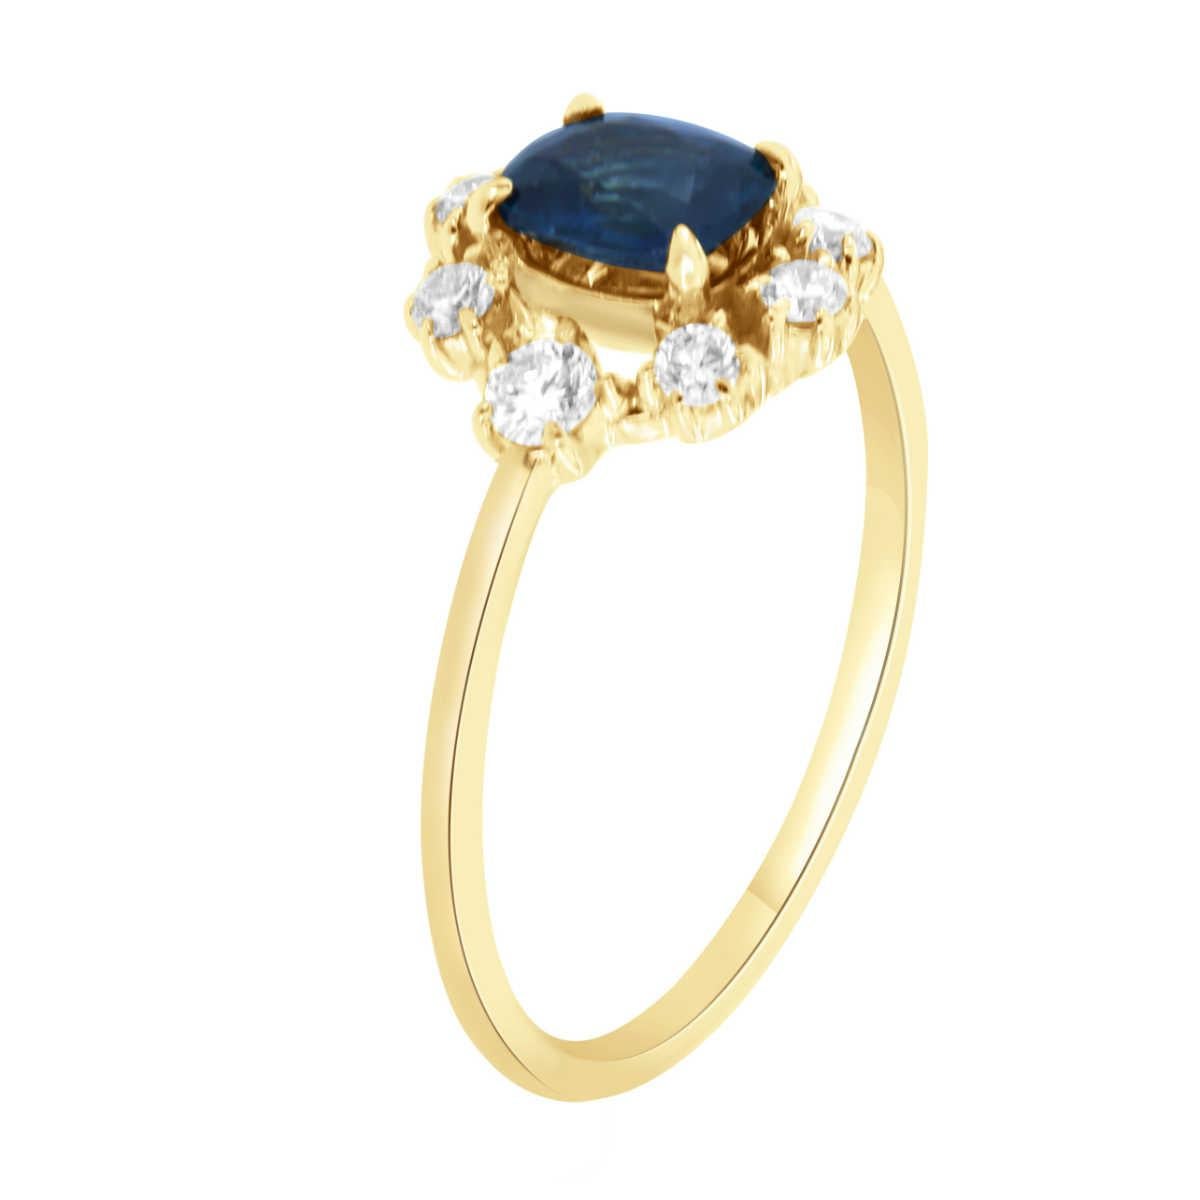 This delicate 14k yellow gold ring features a 0.68 Carat Natural Sri - Lankan blue sapphire Cushion-shaped encircled by a halo of eight (8) brilliant round diamonds in a total of 0.28 carat. The diamonds are G in color and SI1 in clarity.